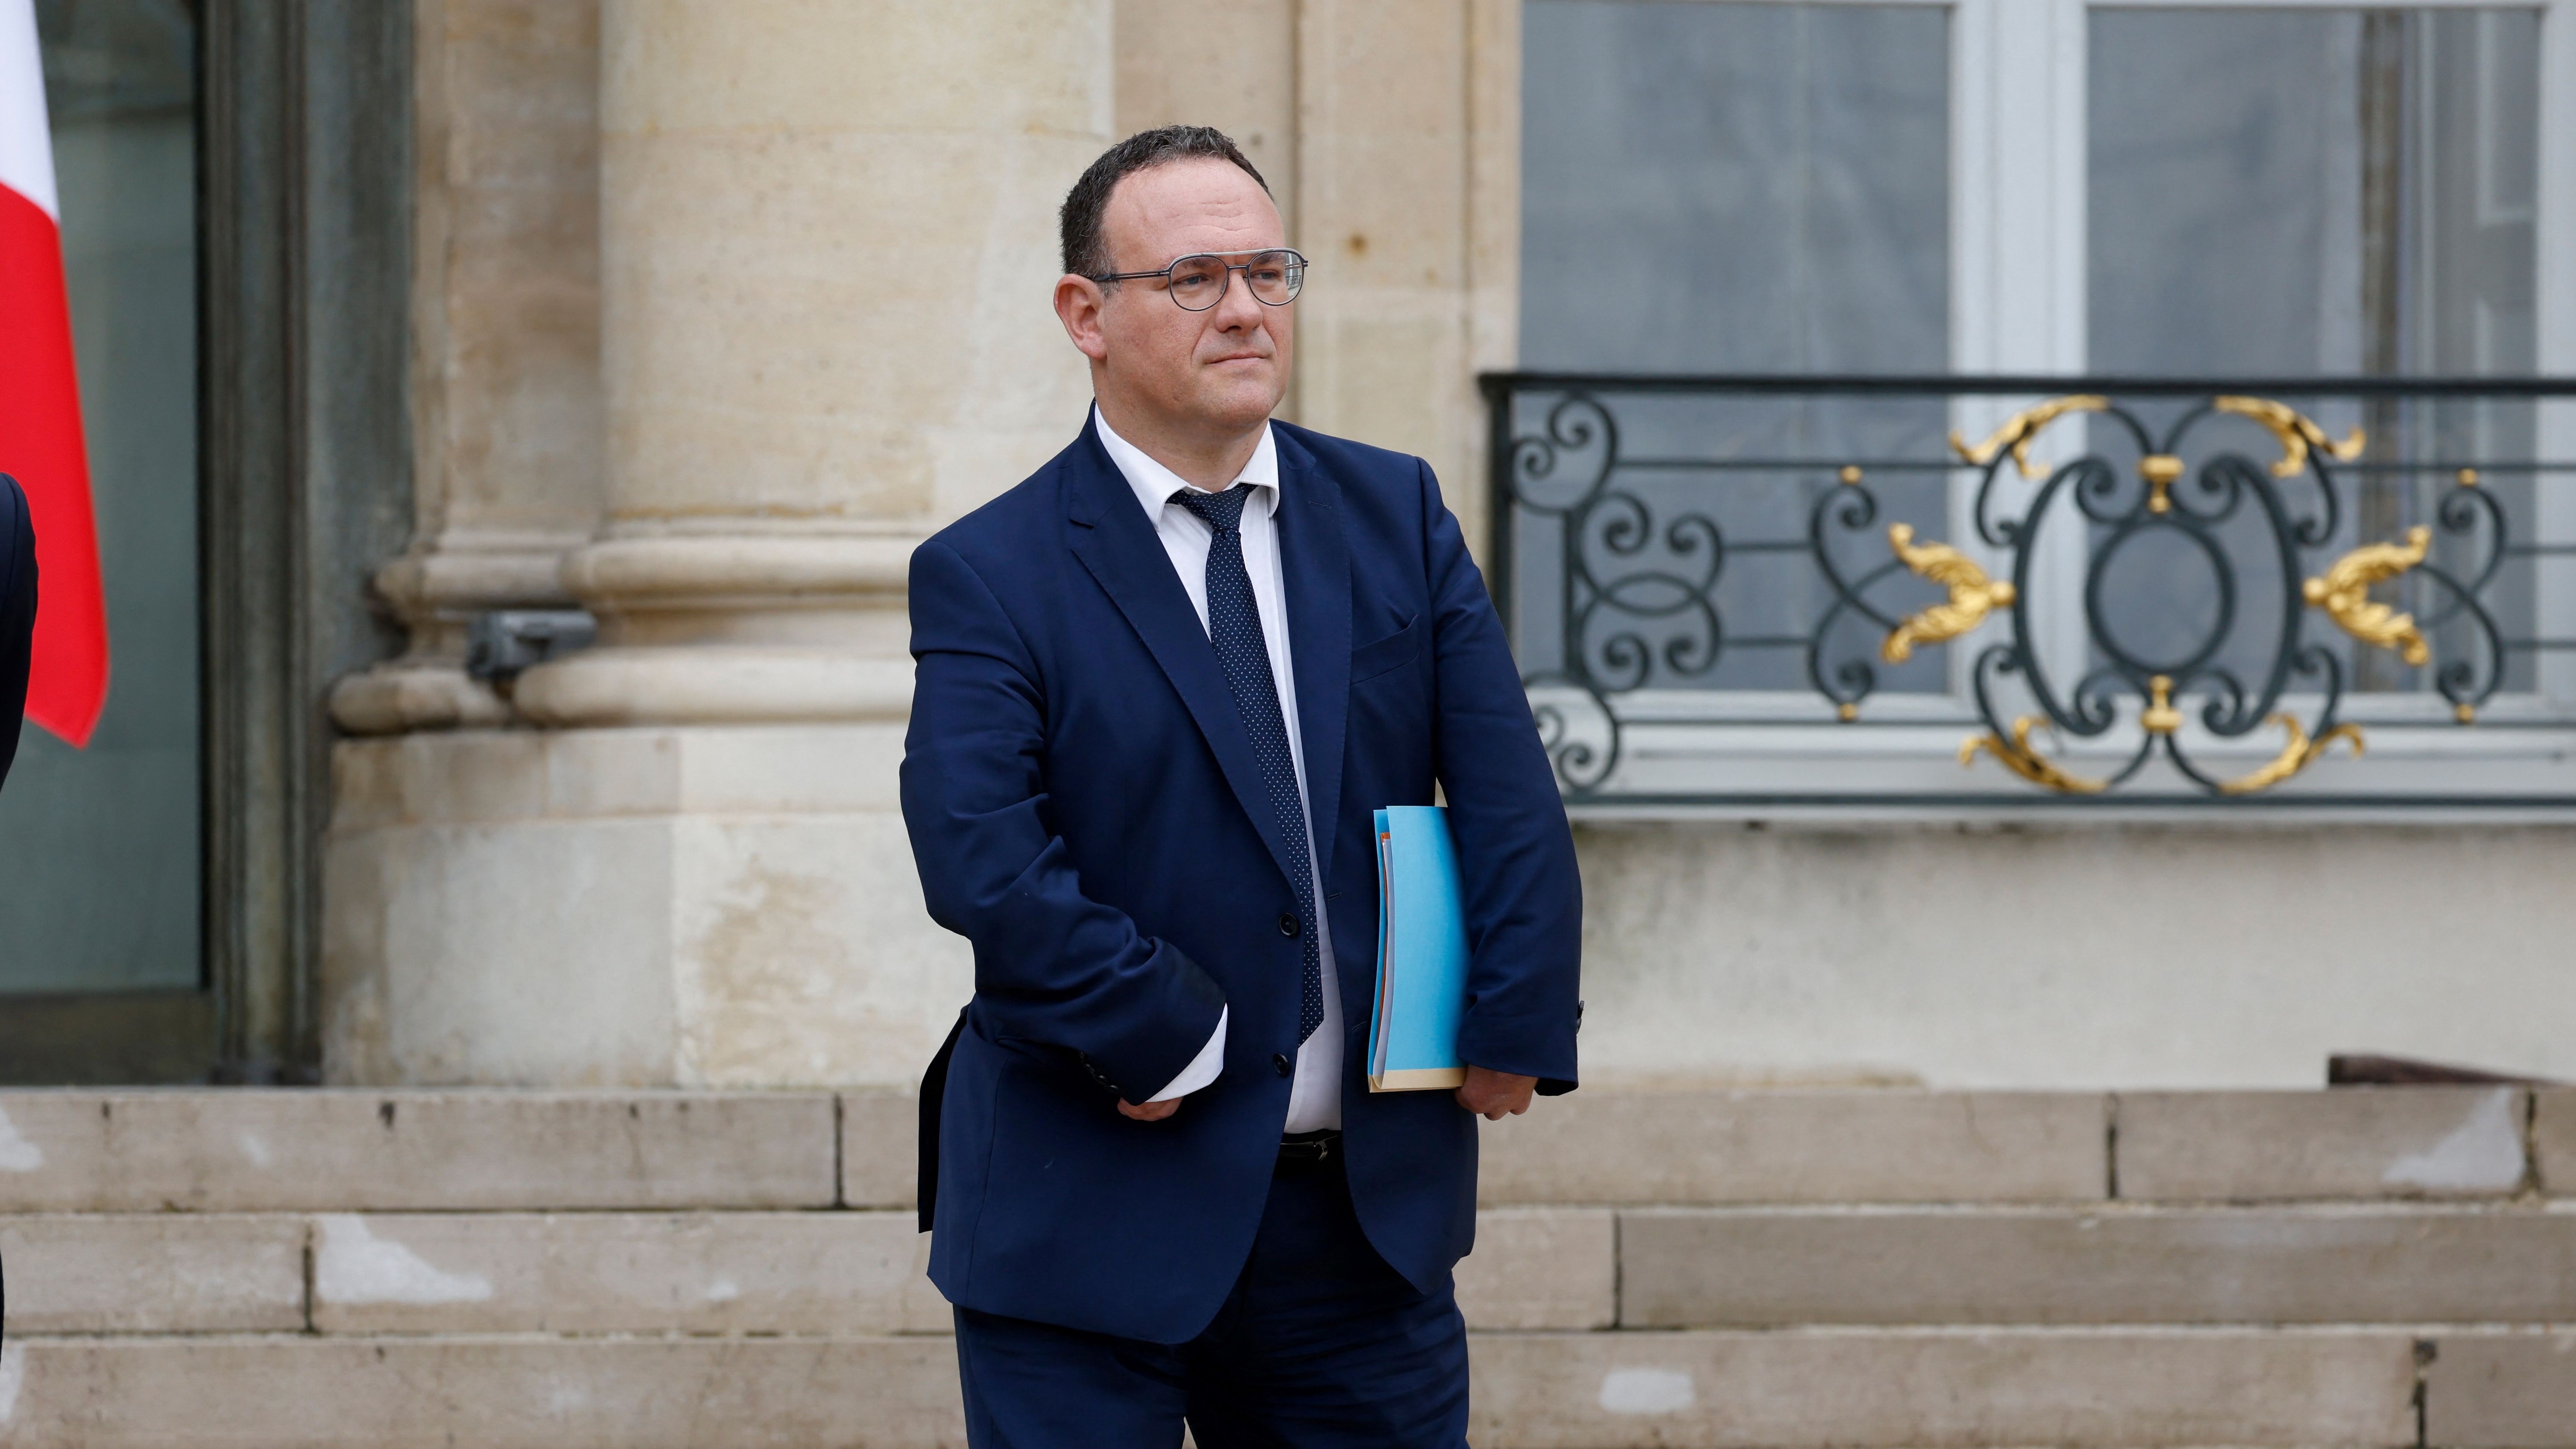 Damien Abad leaves the first meeting of Emmanuel Macron’s new cabinet at the Élysée Palace